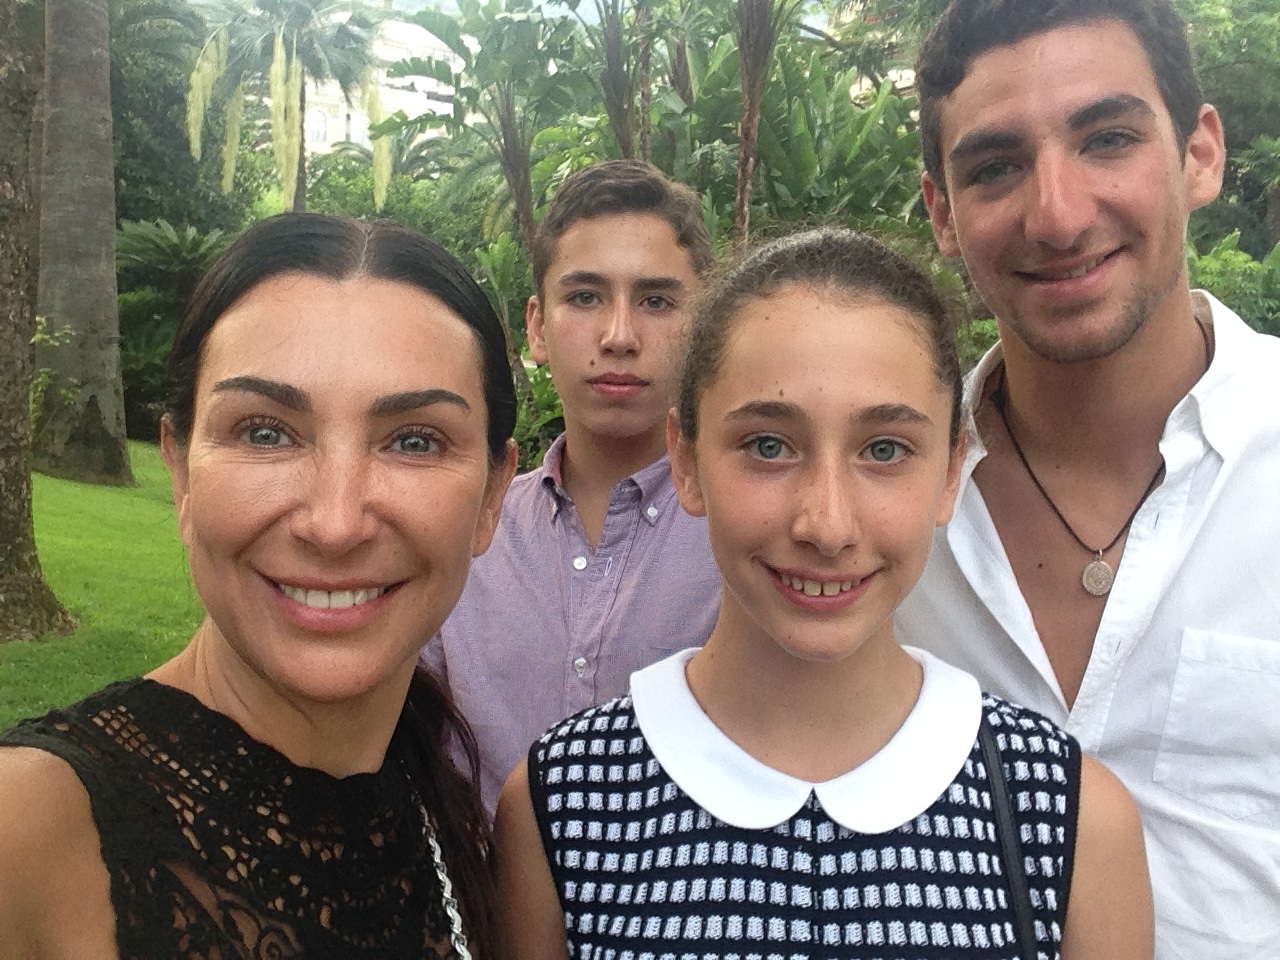  A family selfie in the South of France.&nbsp; 